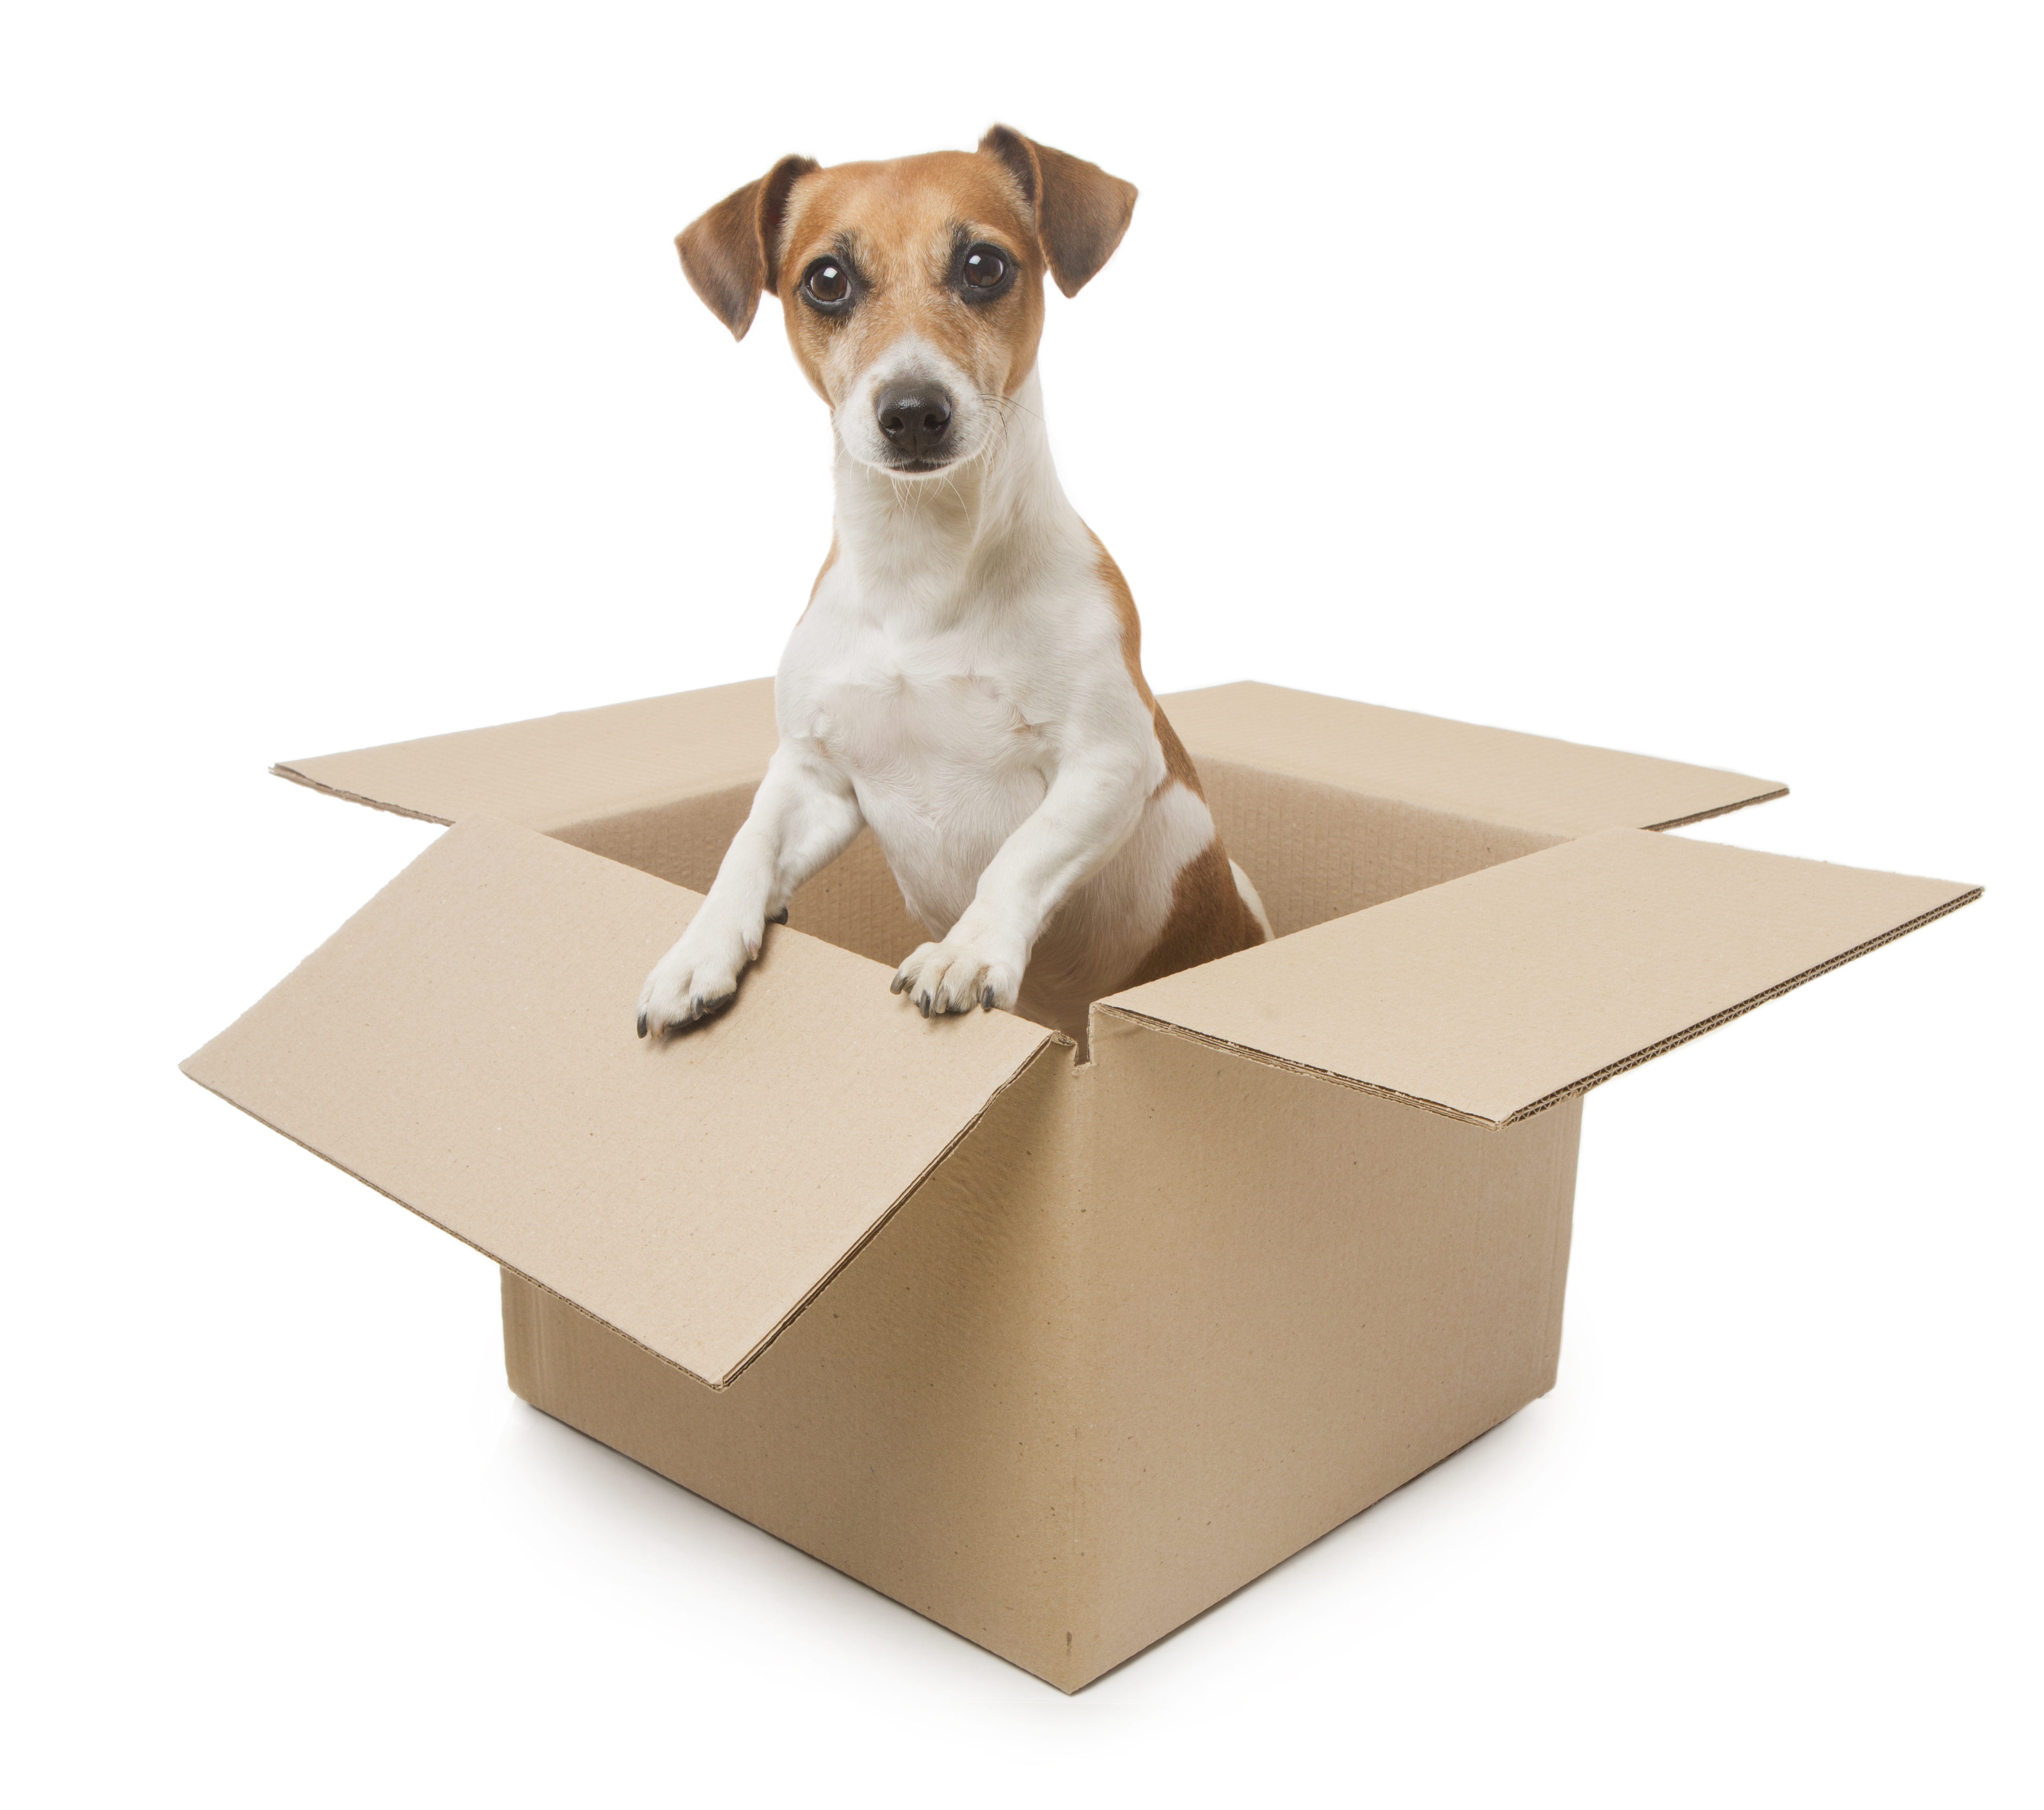 Dog inside the box package delivery